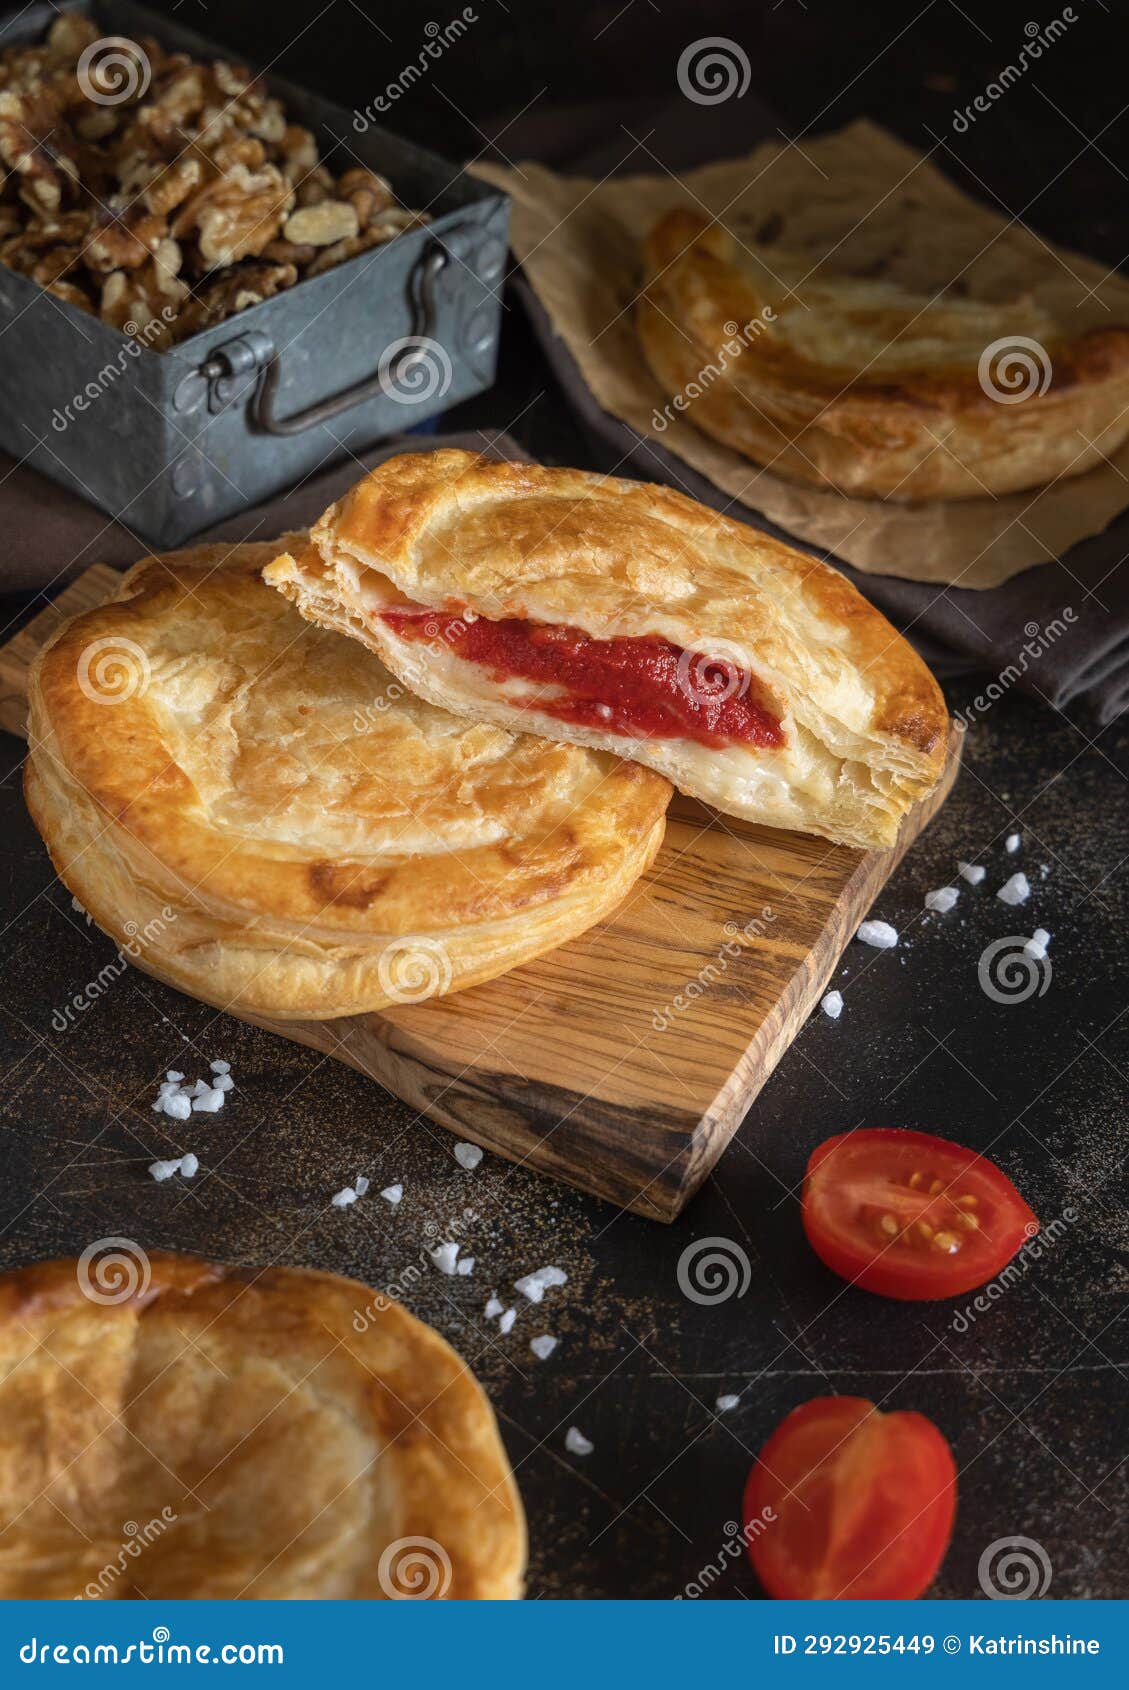 rustico puff pastry from lecce filled with stuffed with tomato, mozzarella and bechamel sauce